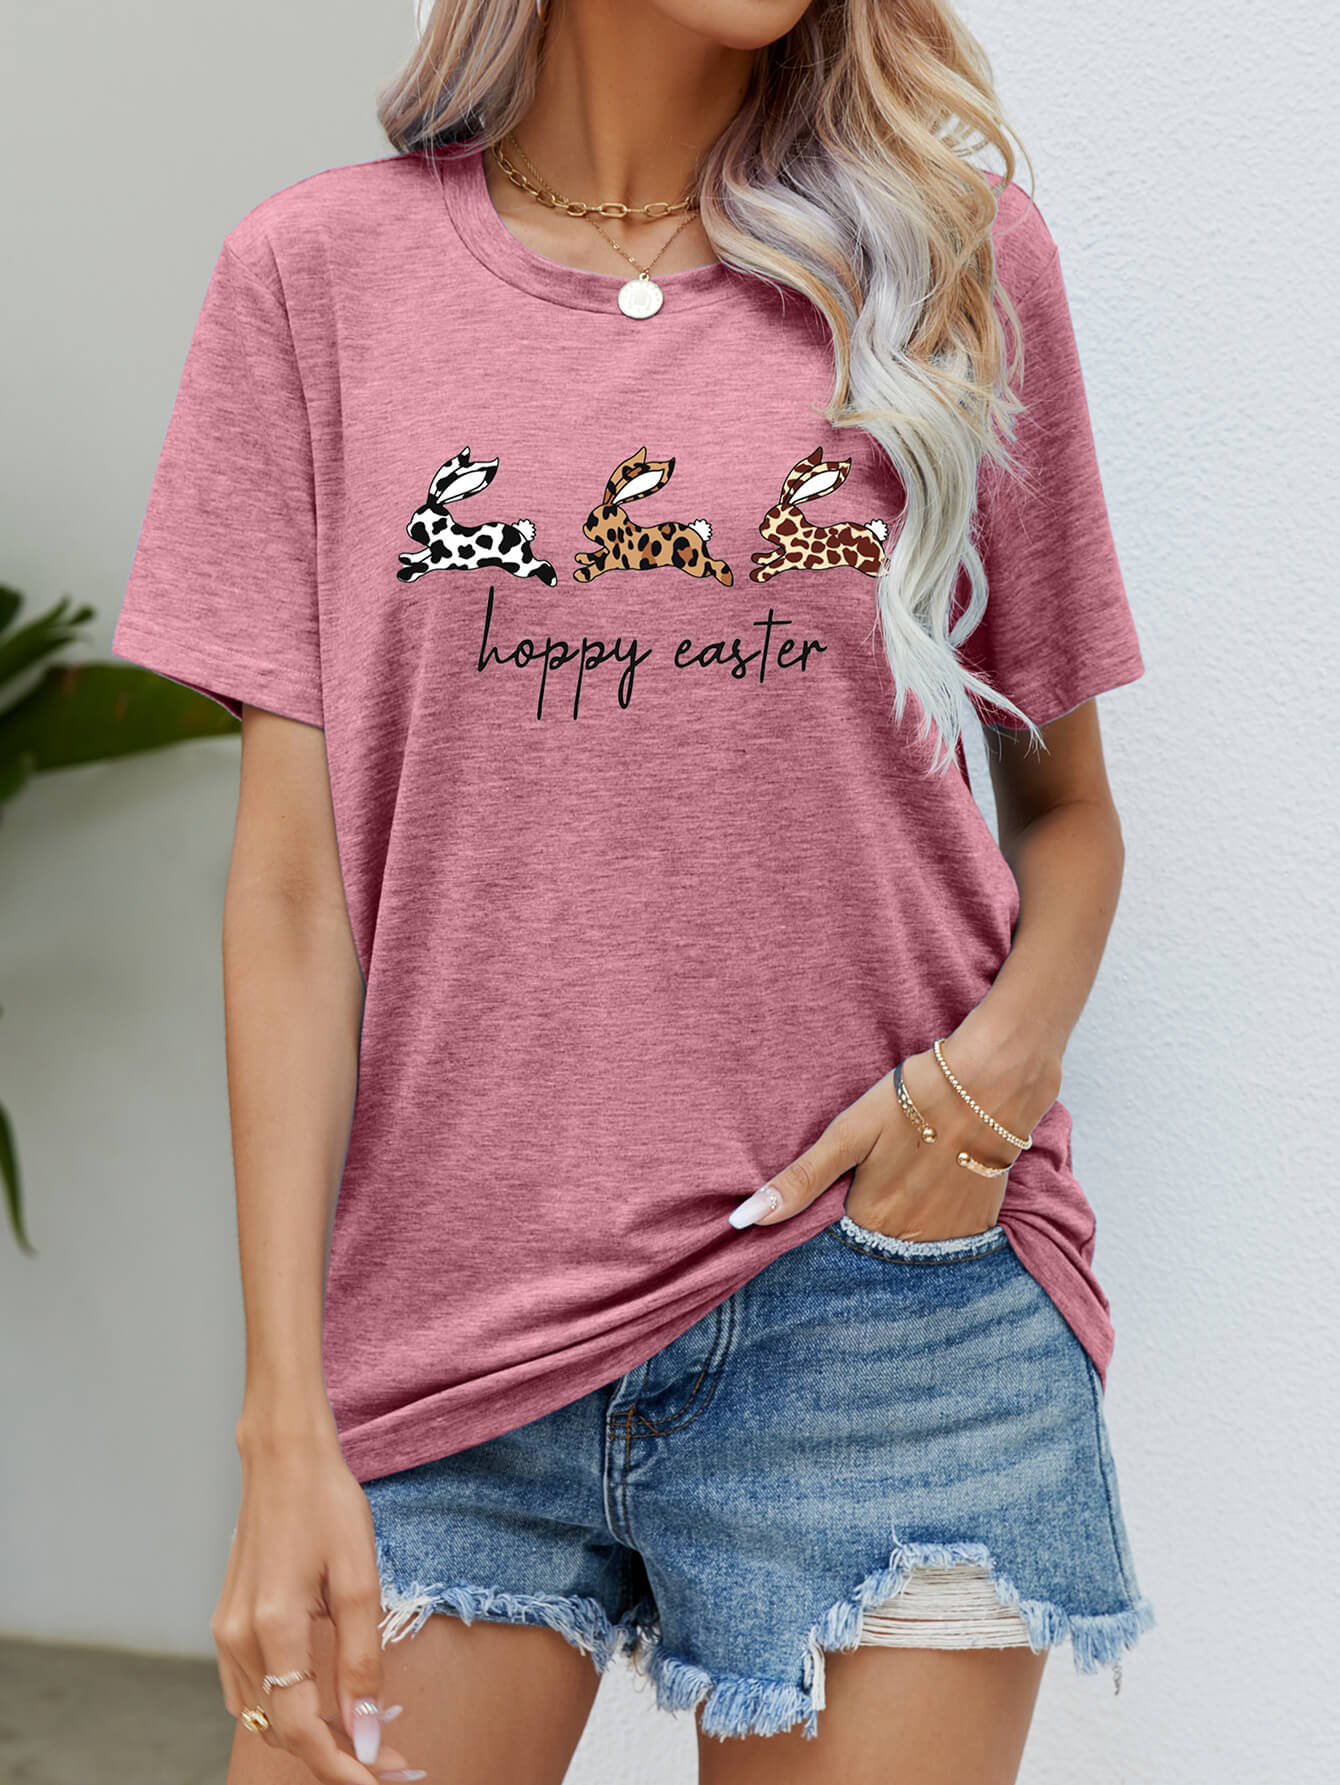 HOPPY EASTER Bunny Graphic Tee Shirt BLUE ZONE PLANET